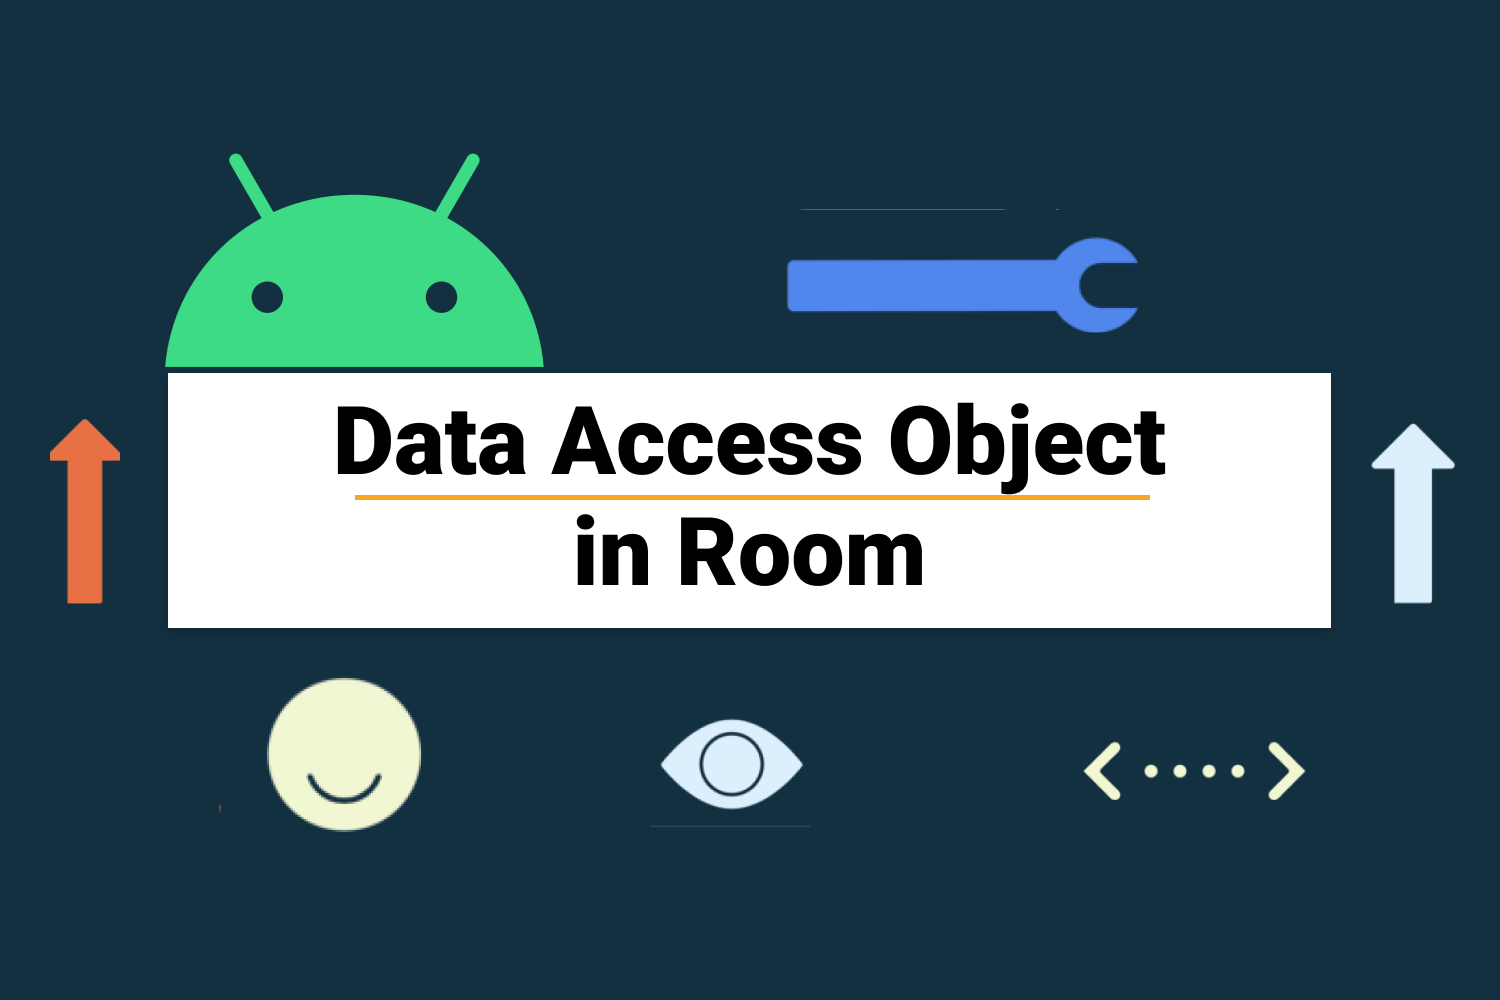 Data Access Objects - DAO in Room